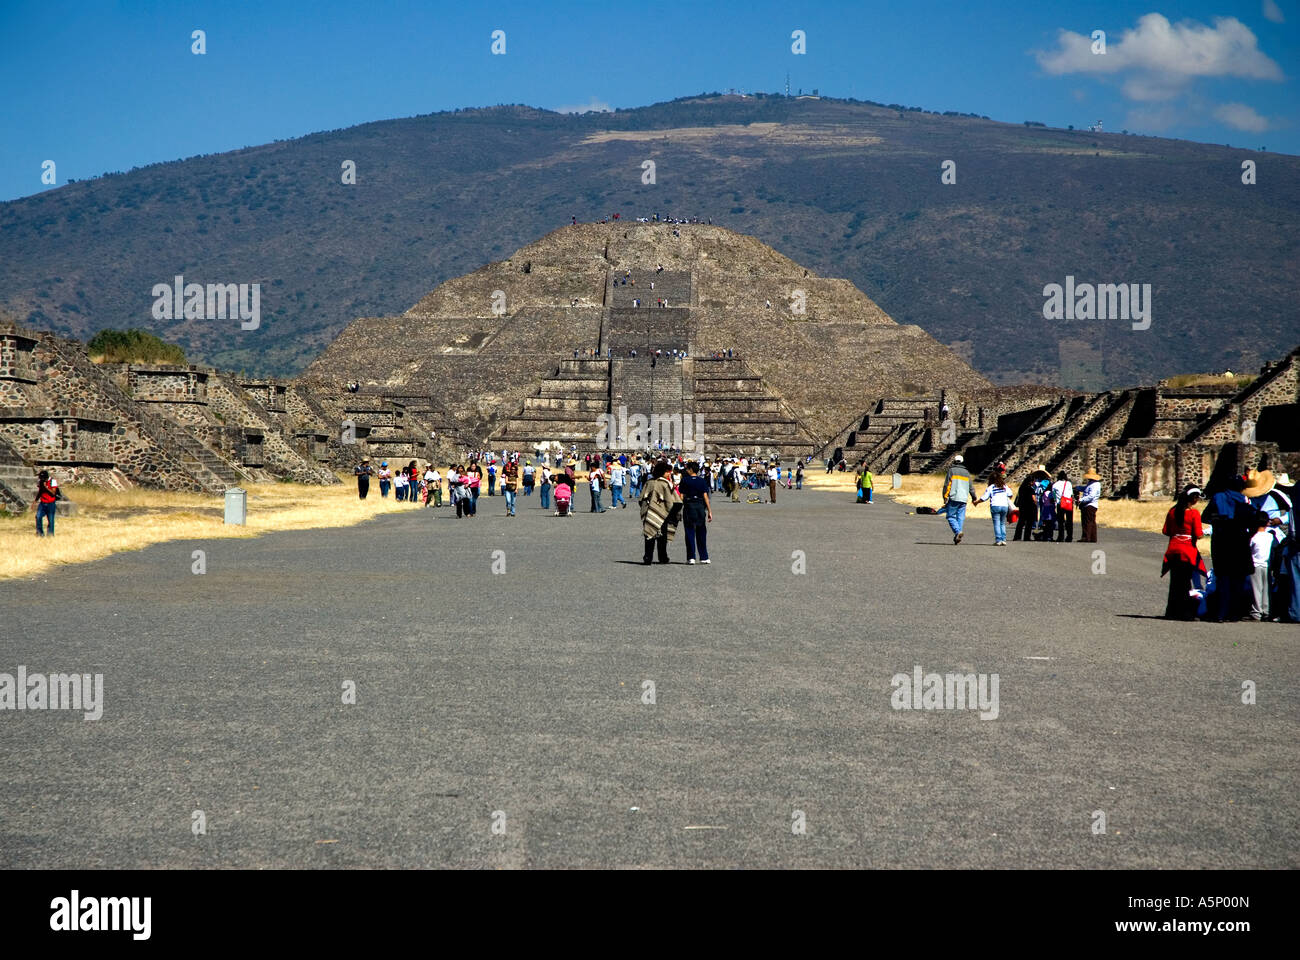 Pyramid of the Moon - Teotihuacan - Mexico Stock Photo - Alamy